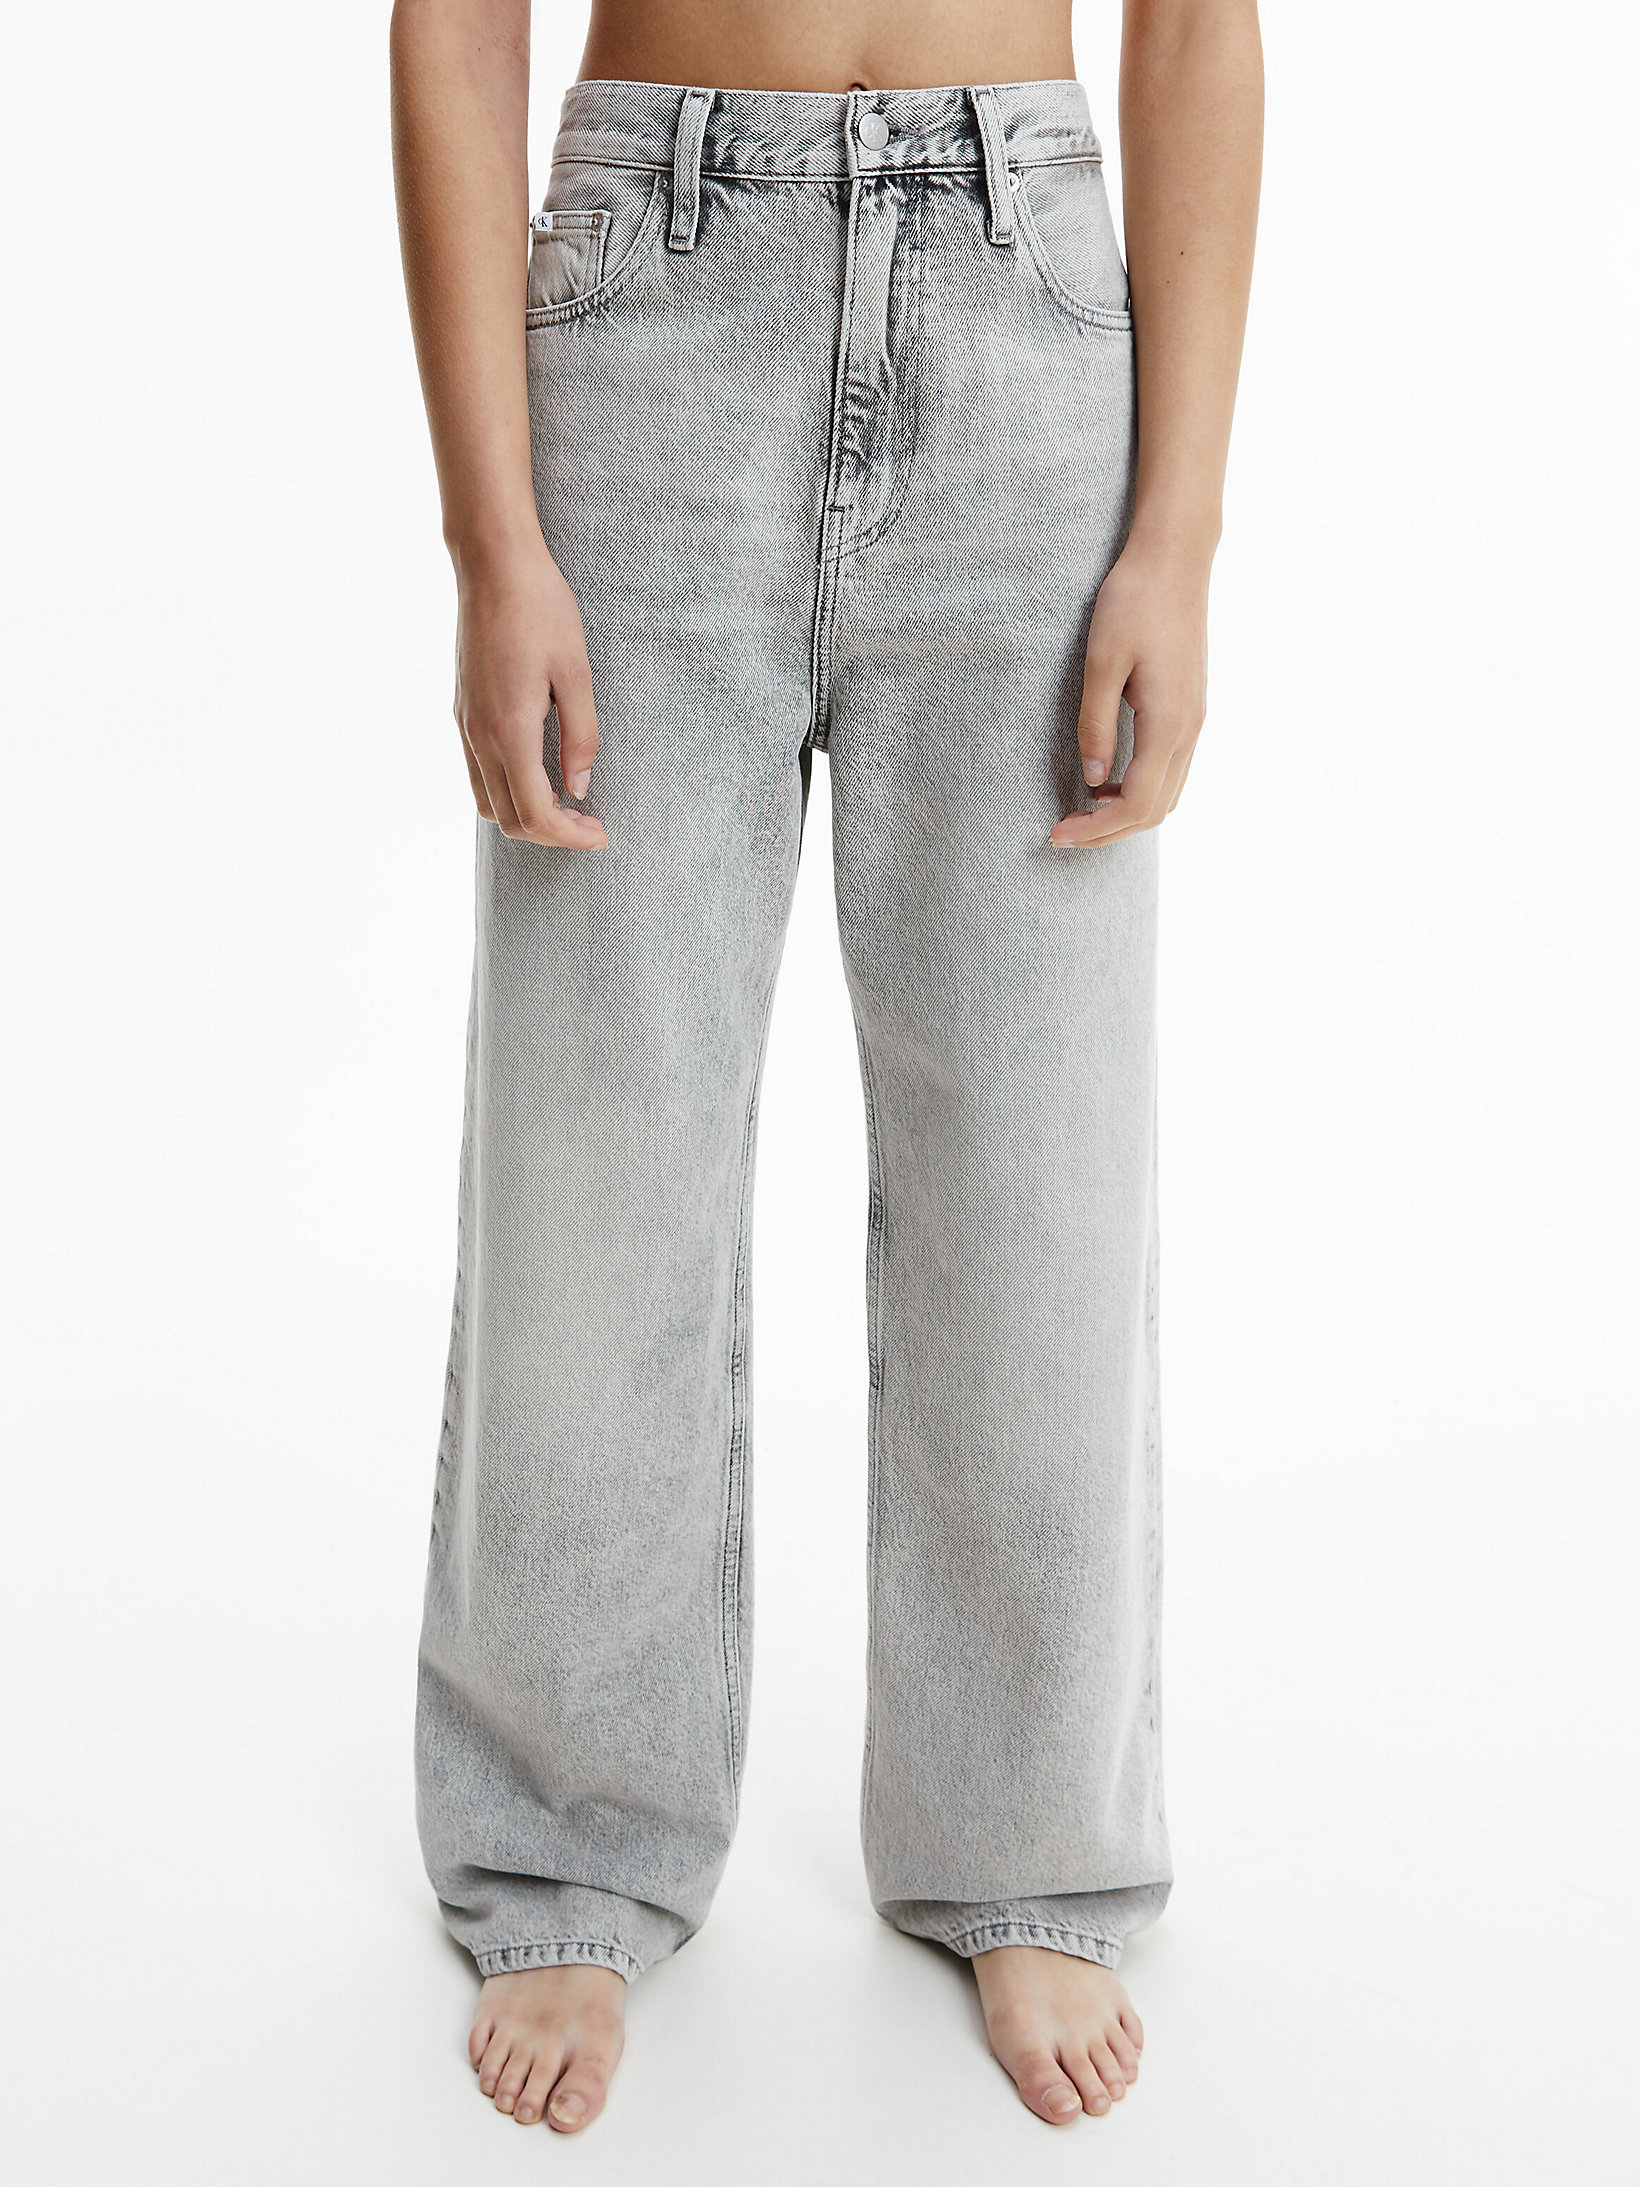 Denim Grey High Rise Relaxed Jeans undefined donna Calvin Klein